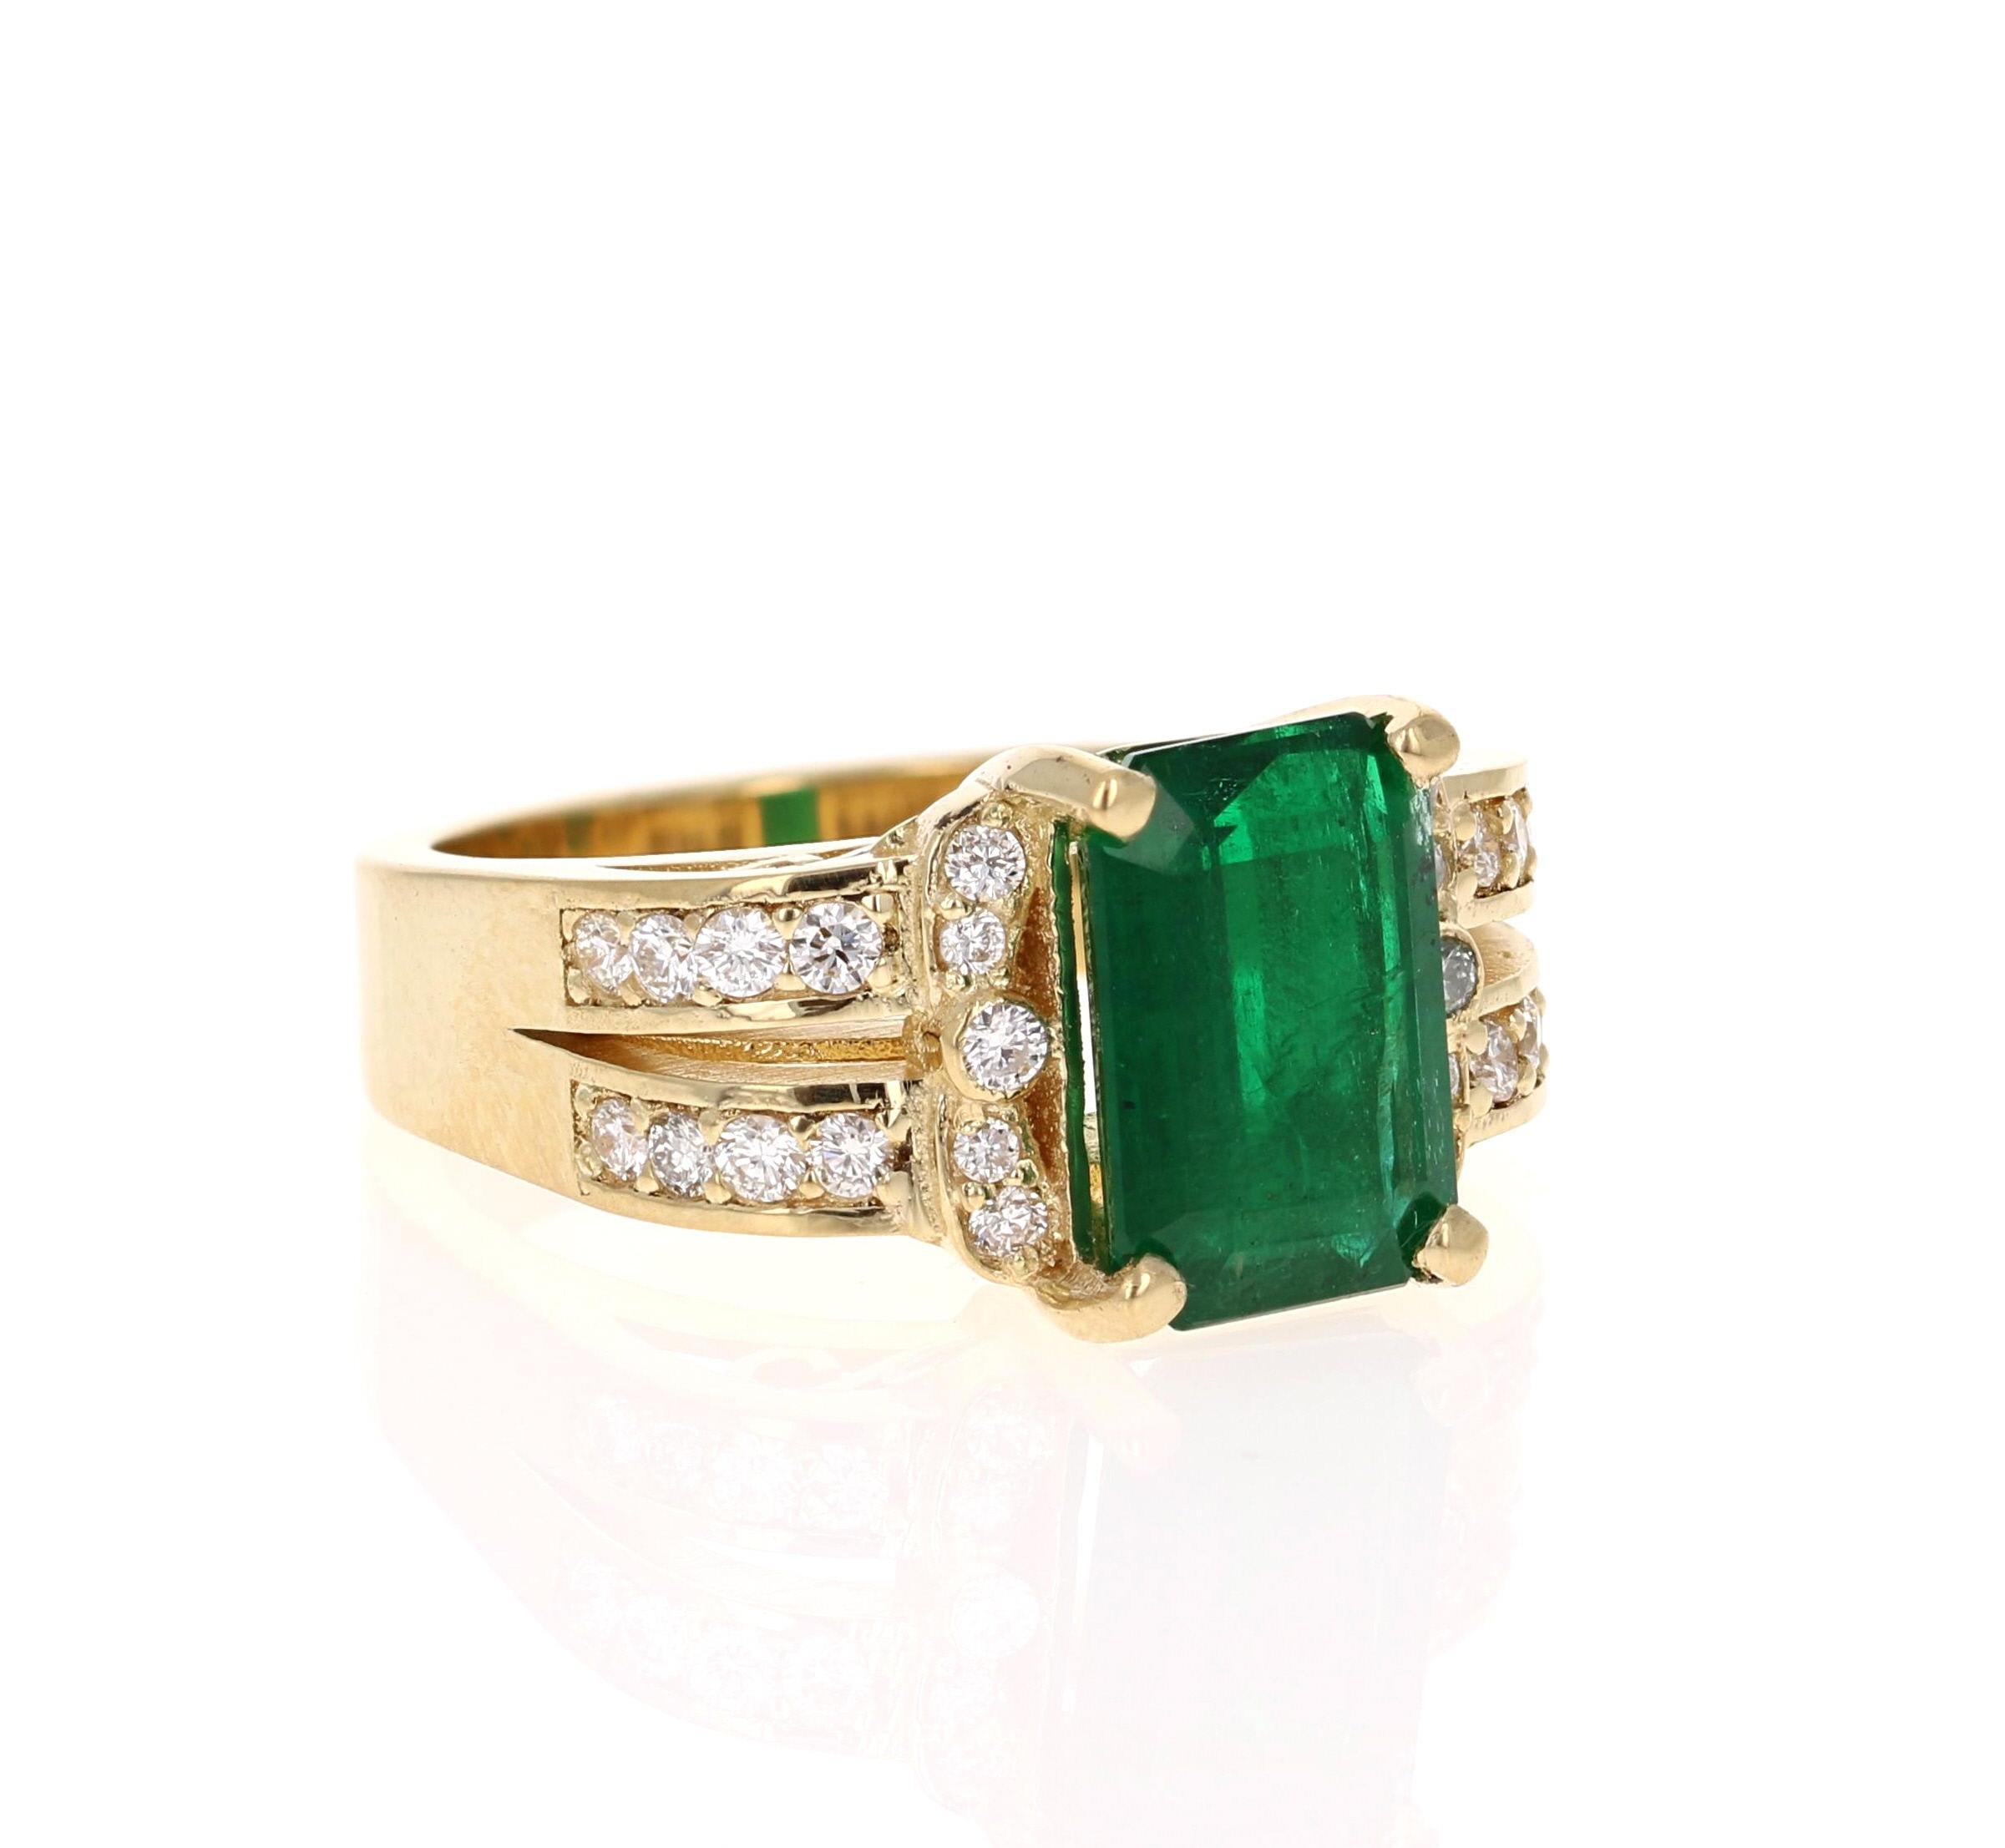 This gorgeous ring has a large and deep green Emerald Cut Emerald that is set in the center of the ring that weighs 3.43 Carats.  The Emerald is surrounded by 26 Round Cut Diamonds that weigh 0.53 Carats. (Clarity: VS, Color: H). The total carat